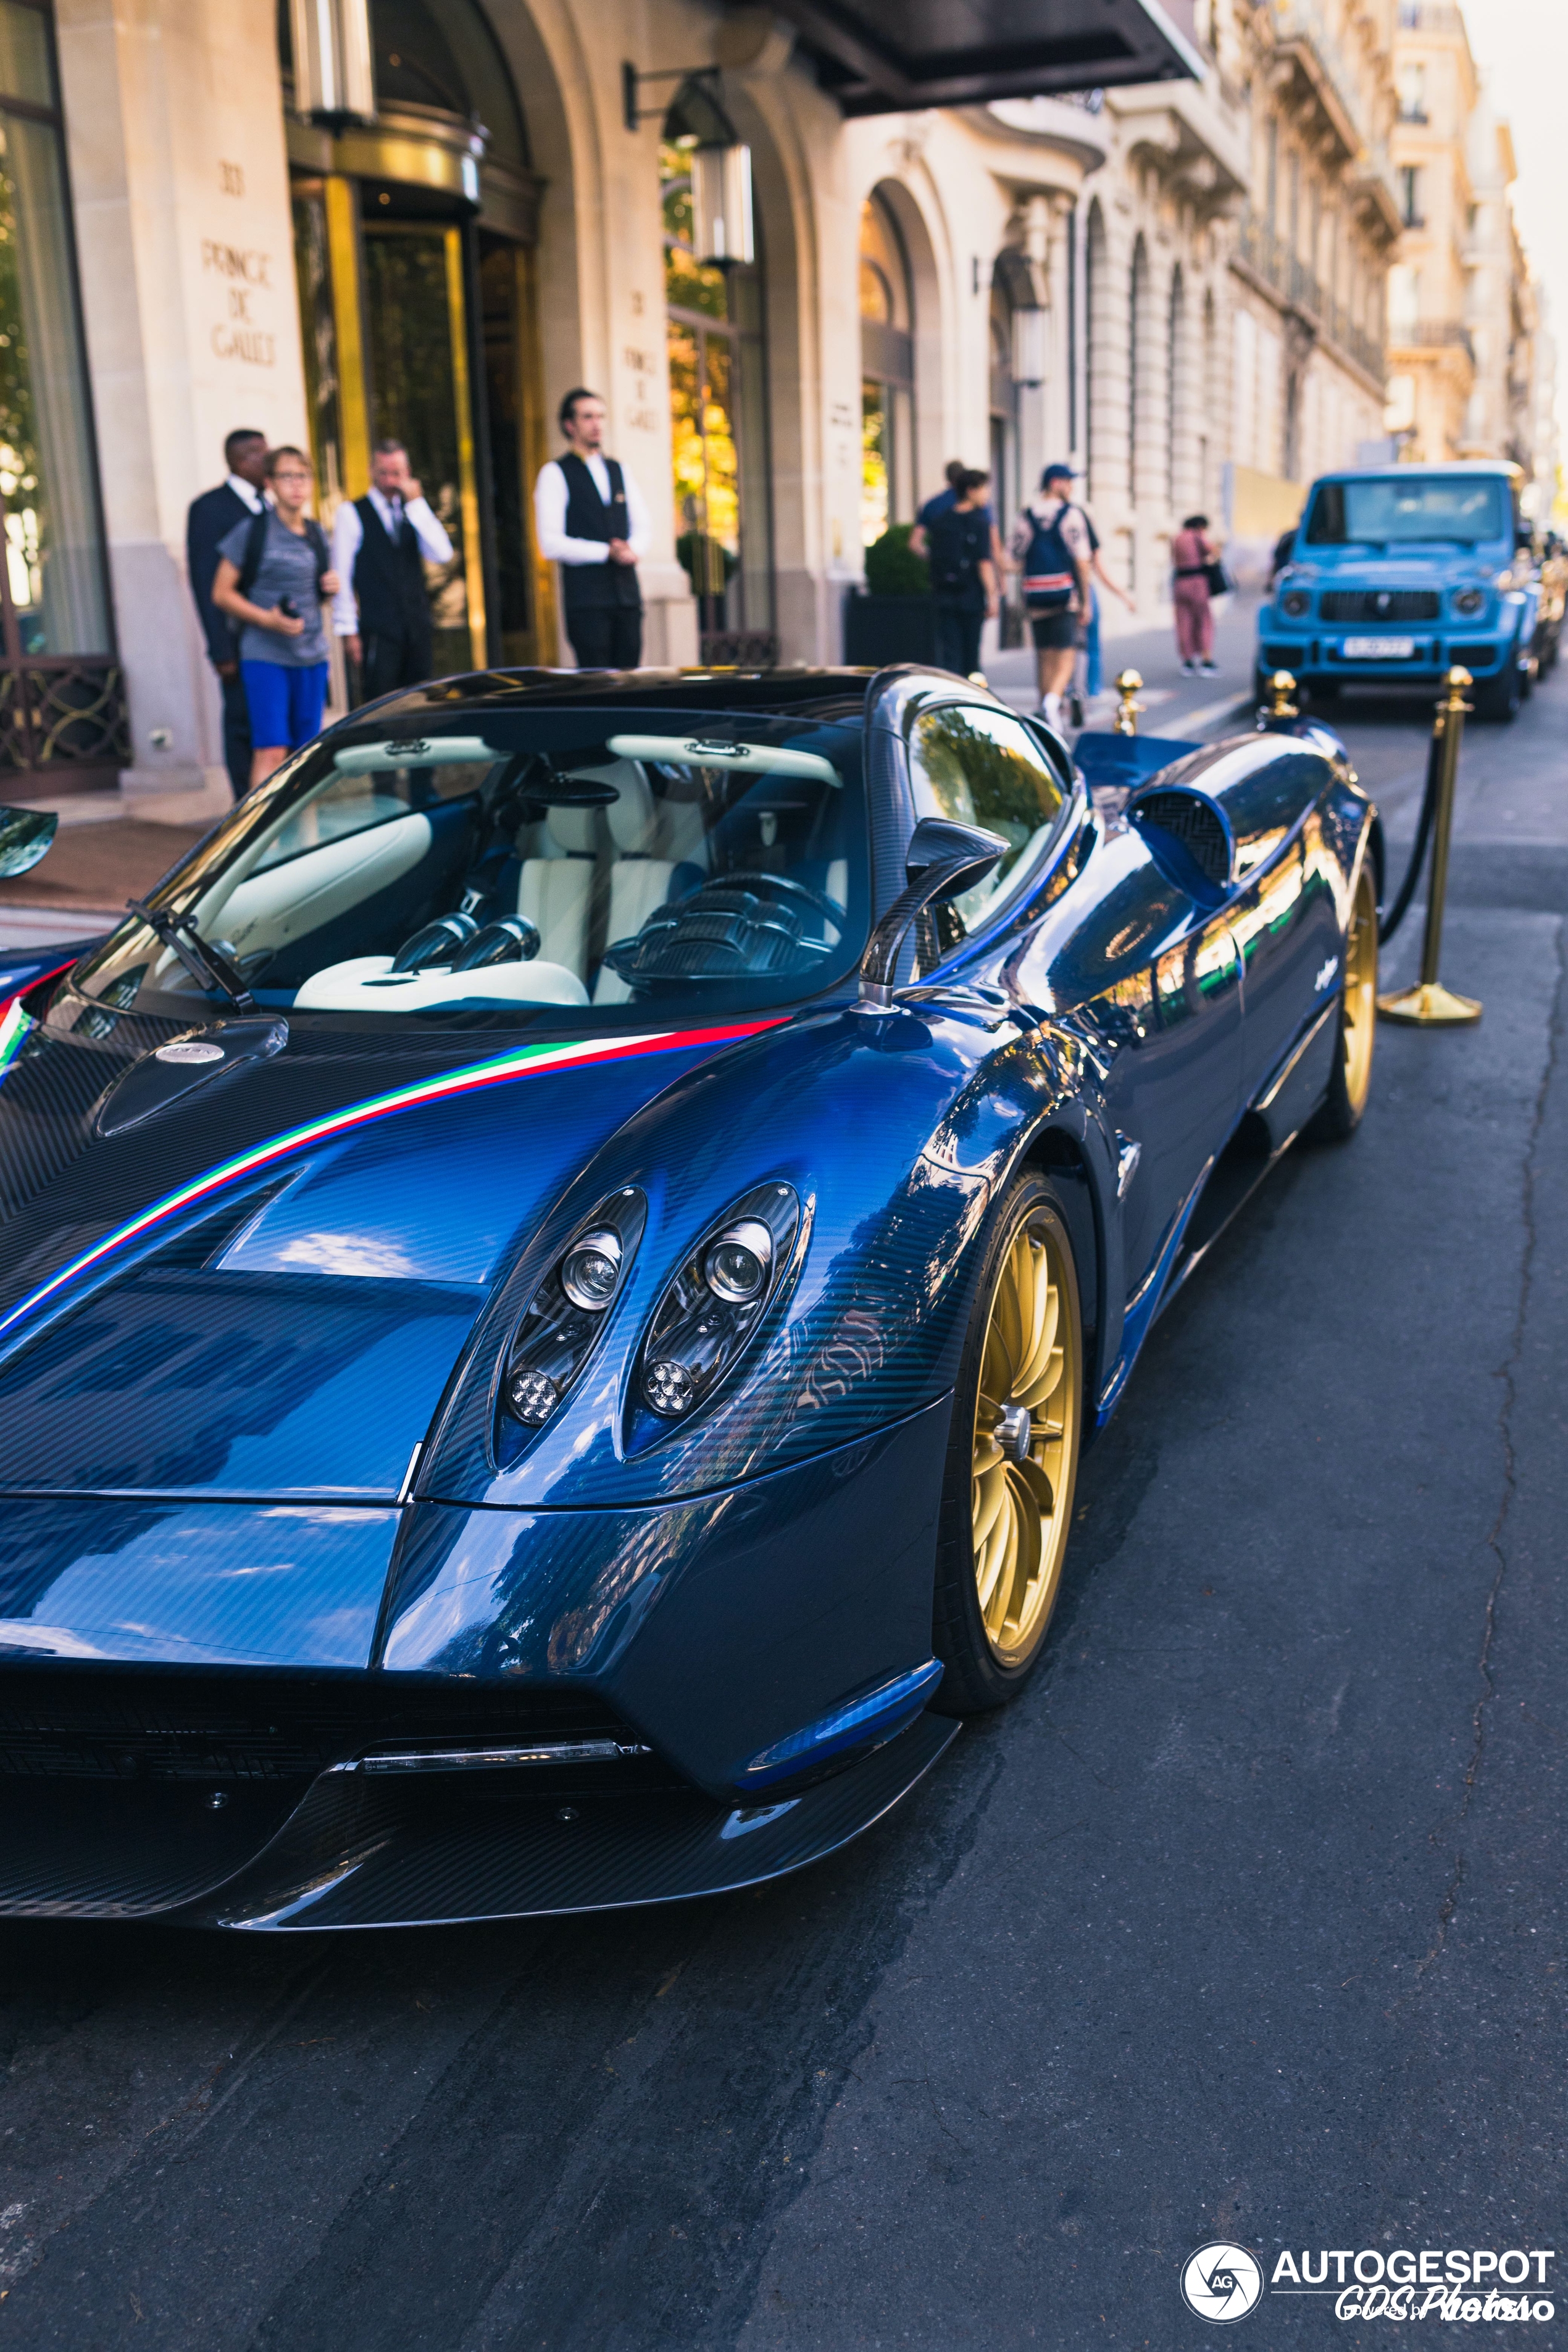 Once again, the Huayra Roadster makes an appearance in Paris